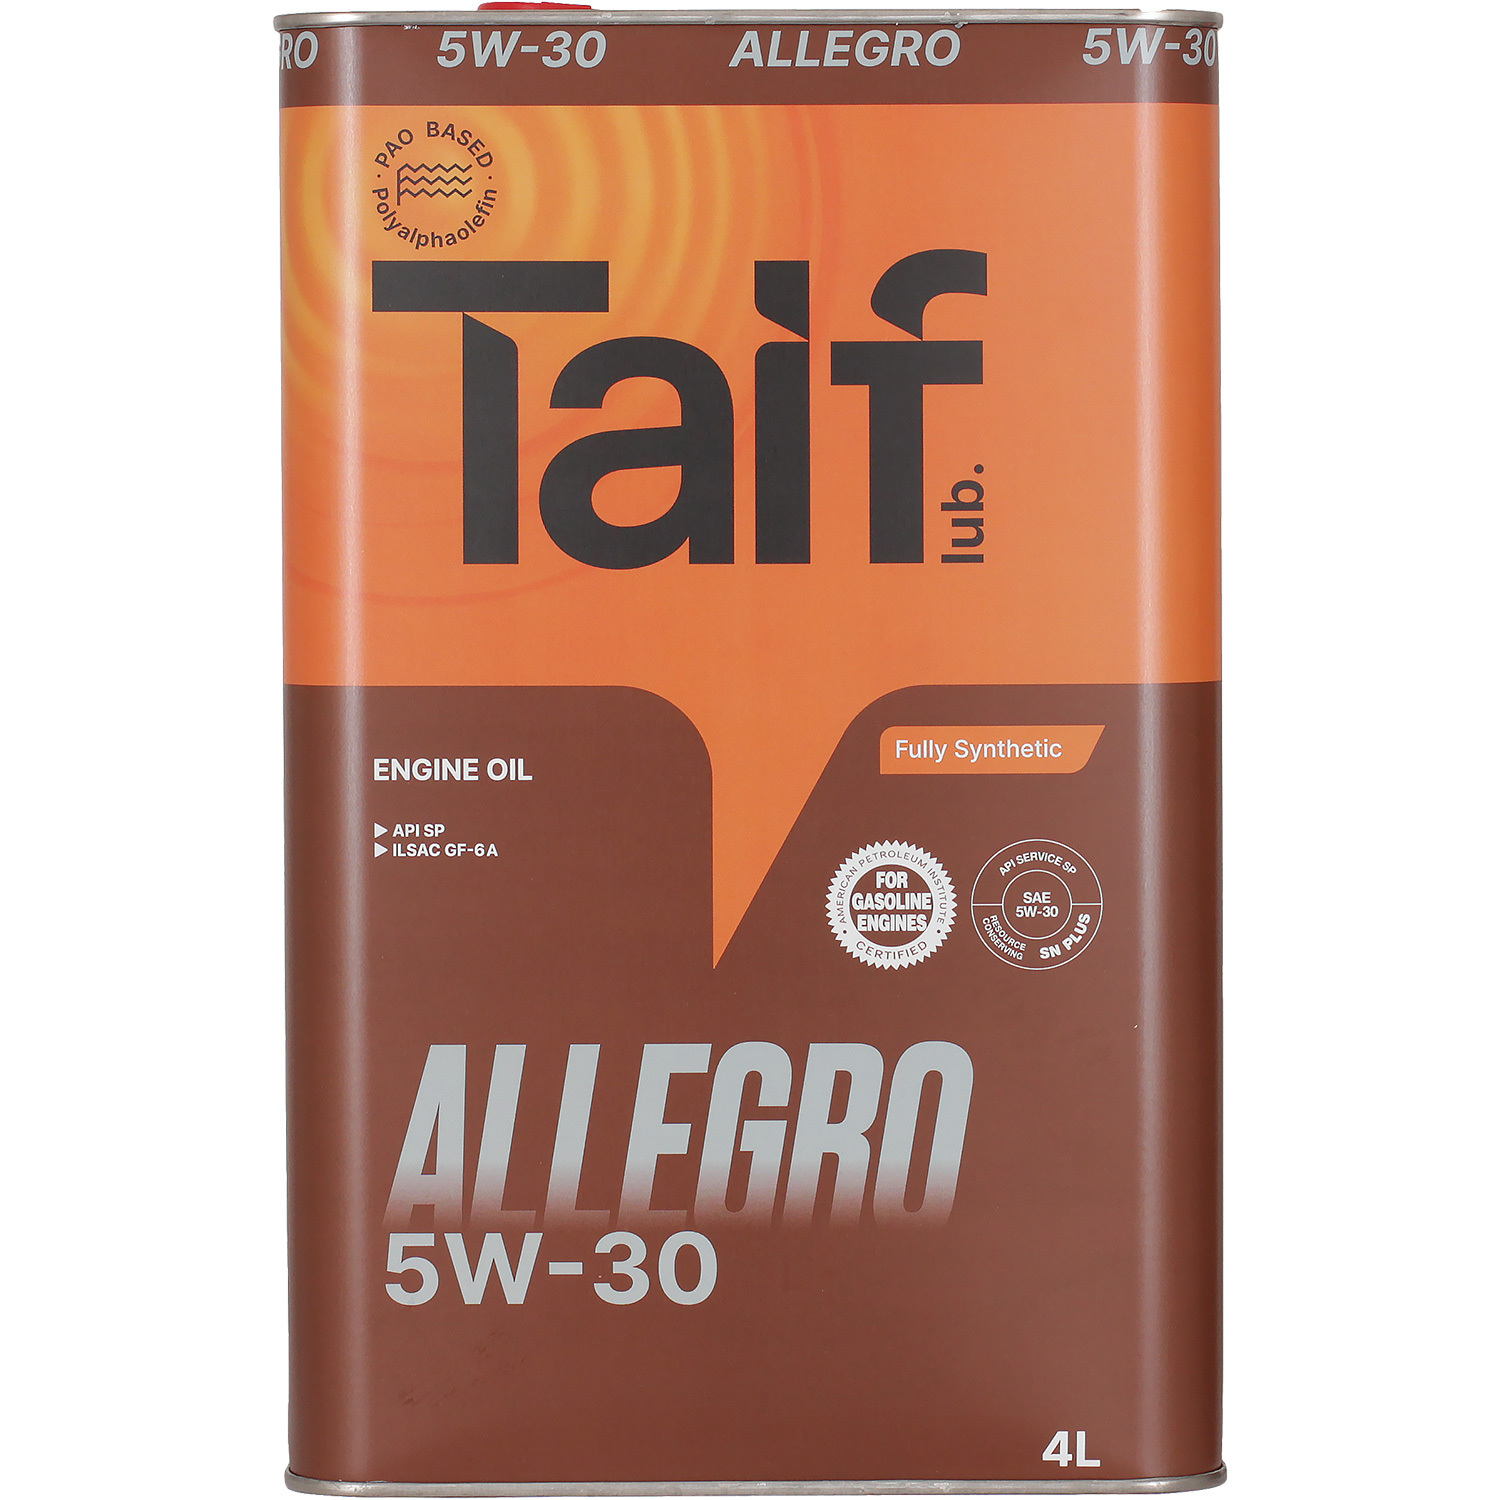 Taif Моторное масло Taif ALLEGRO 5W-30, 4 л